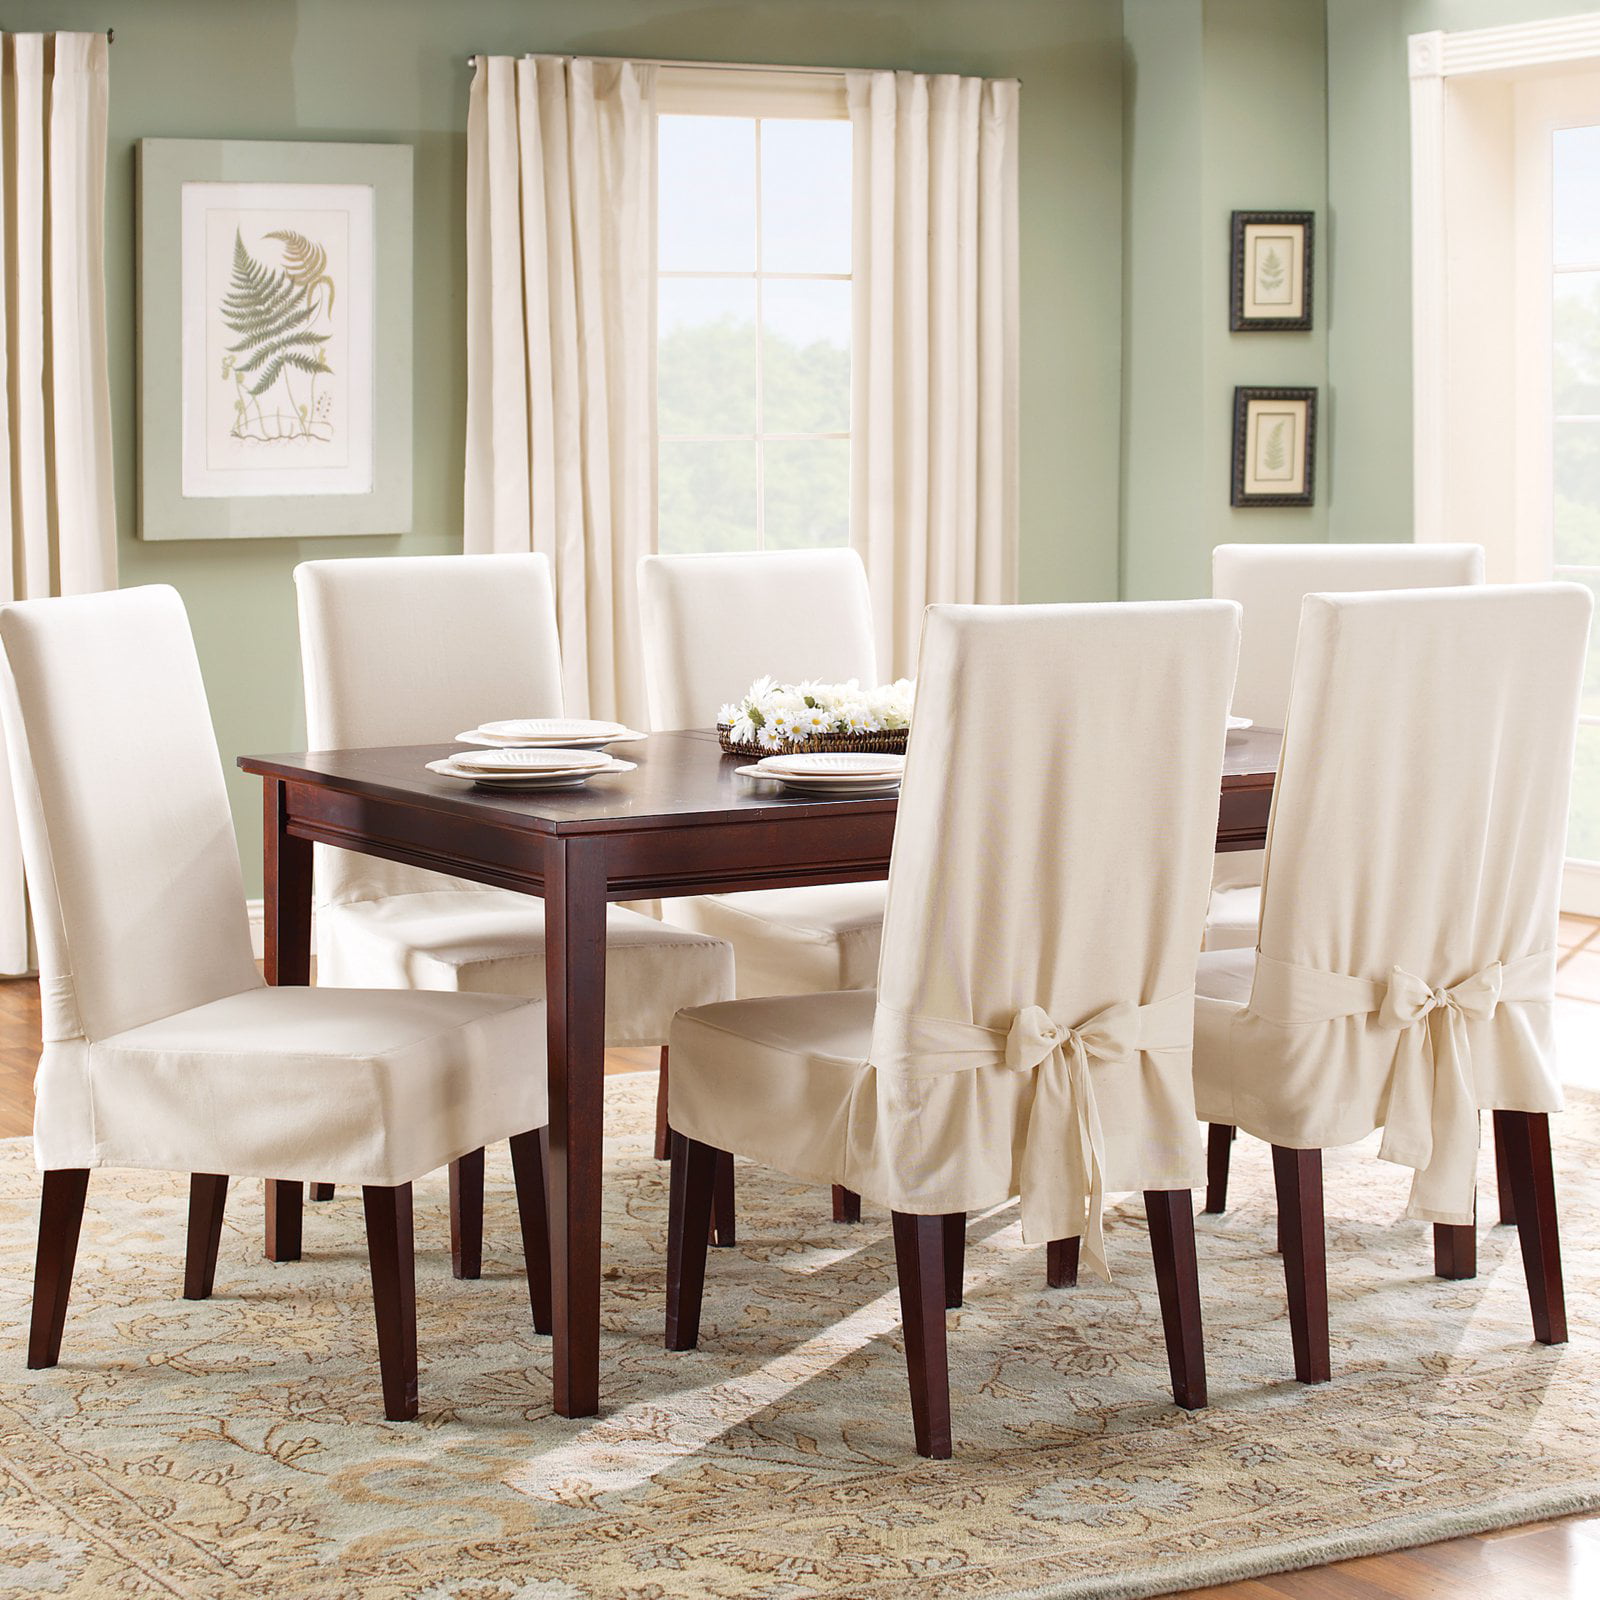 Dining Room Chair Cover, Plastic Dining Chair Covers For Moving